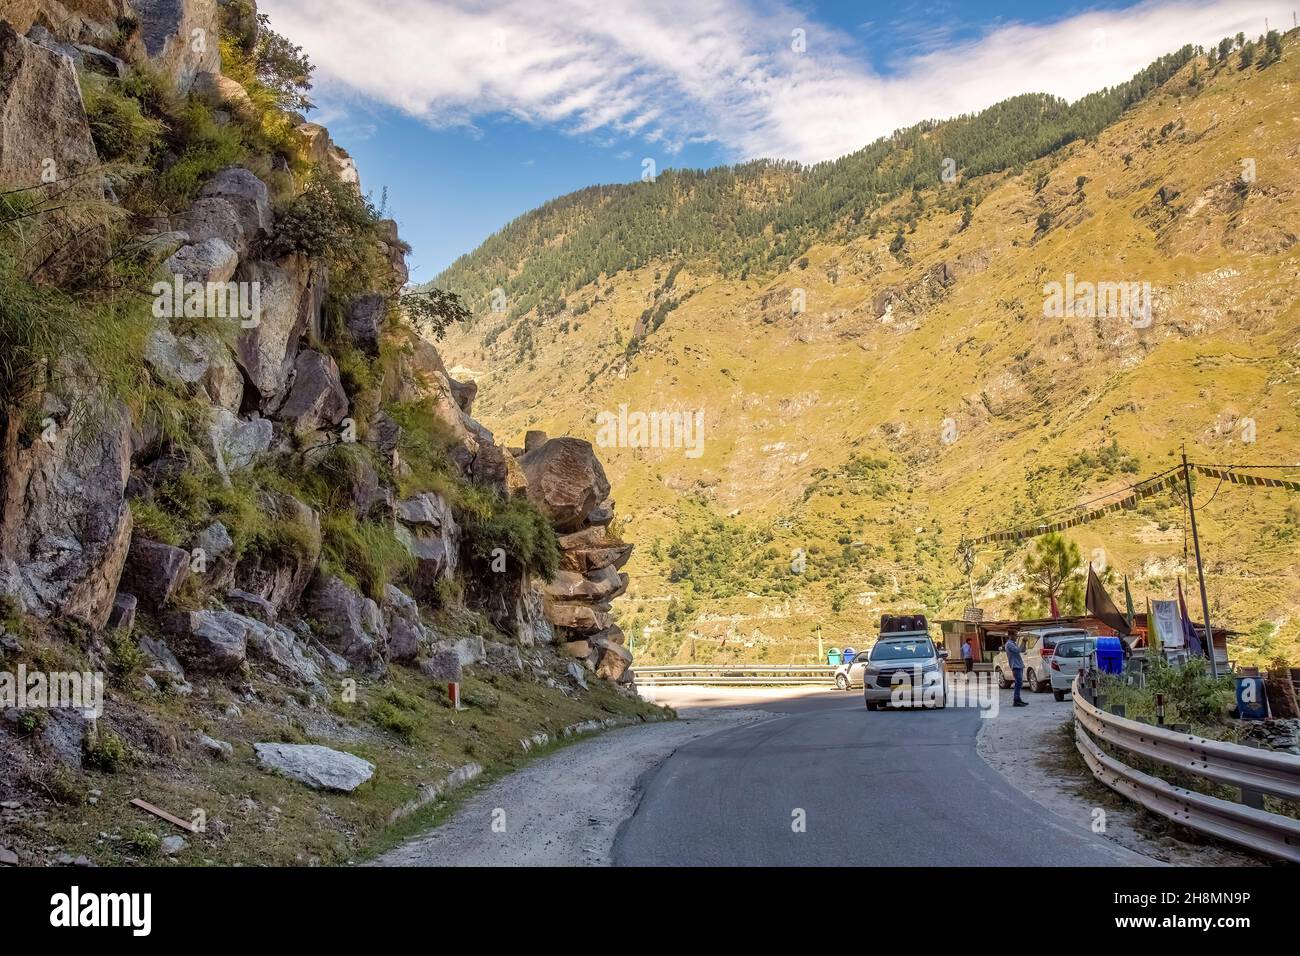 National highway road with scenic Himalaya mountain landscape at Himachal Pradesh India Stock Photo